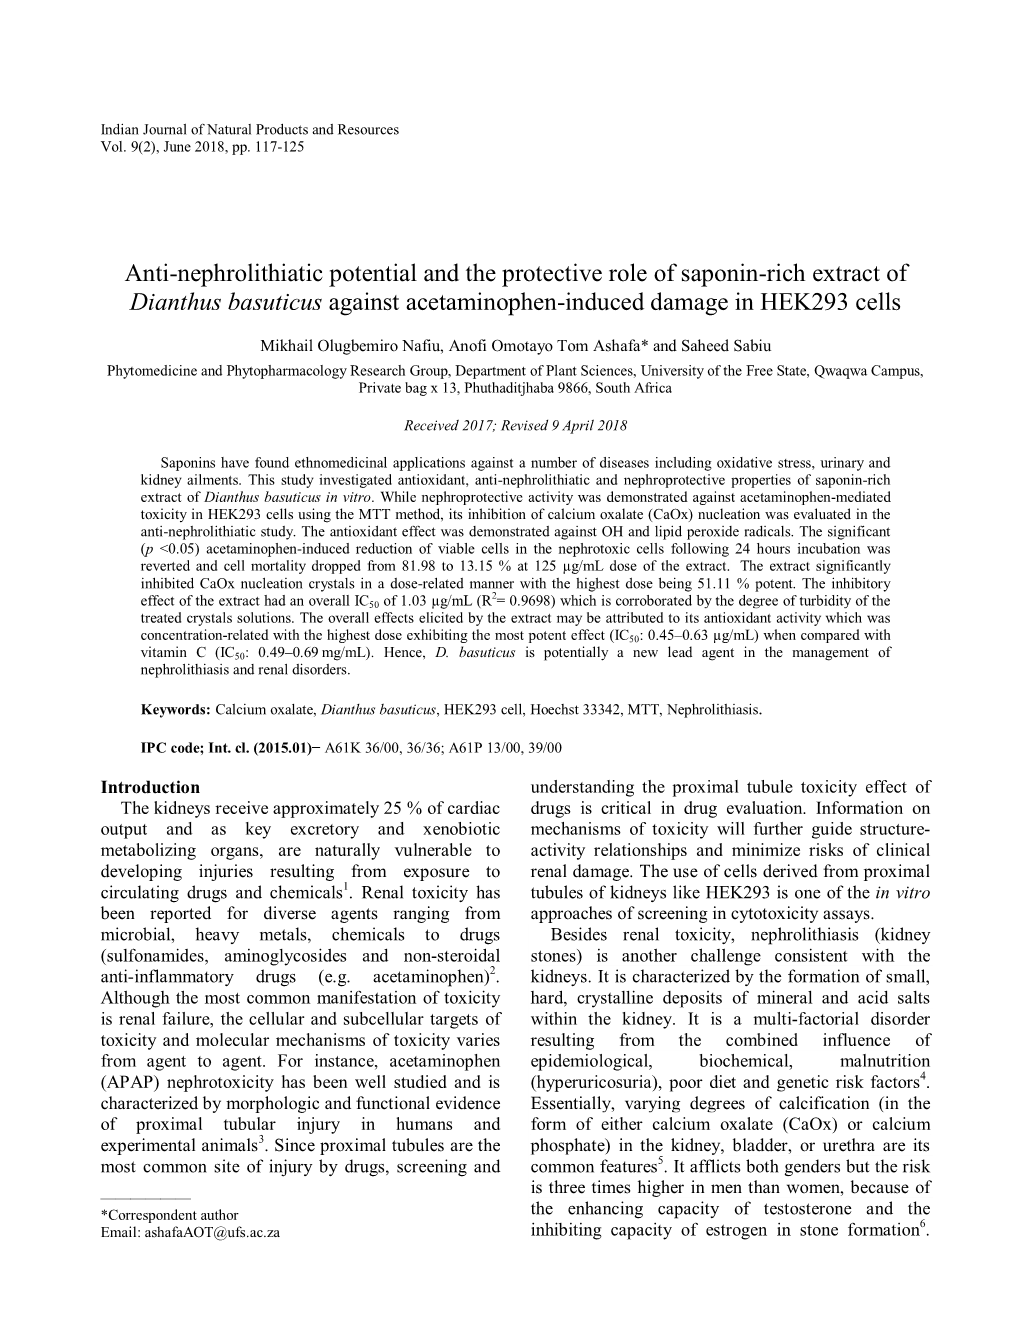 Anti-Nephrolithiatic Potential and the Protective Role of Saponin-Rich Extract of Dianthus Basuticus Against Acetaminophen-Induced Damage in HEK293 Cells